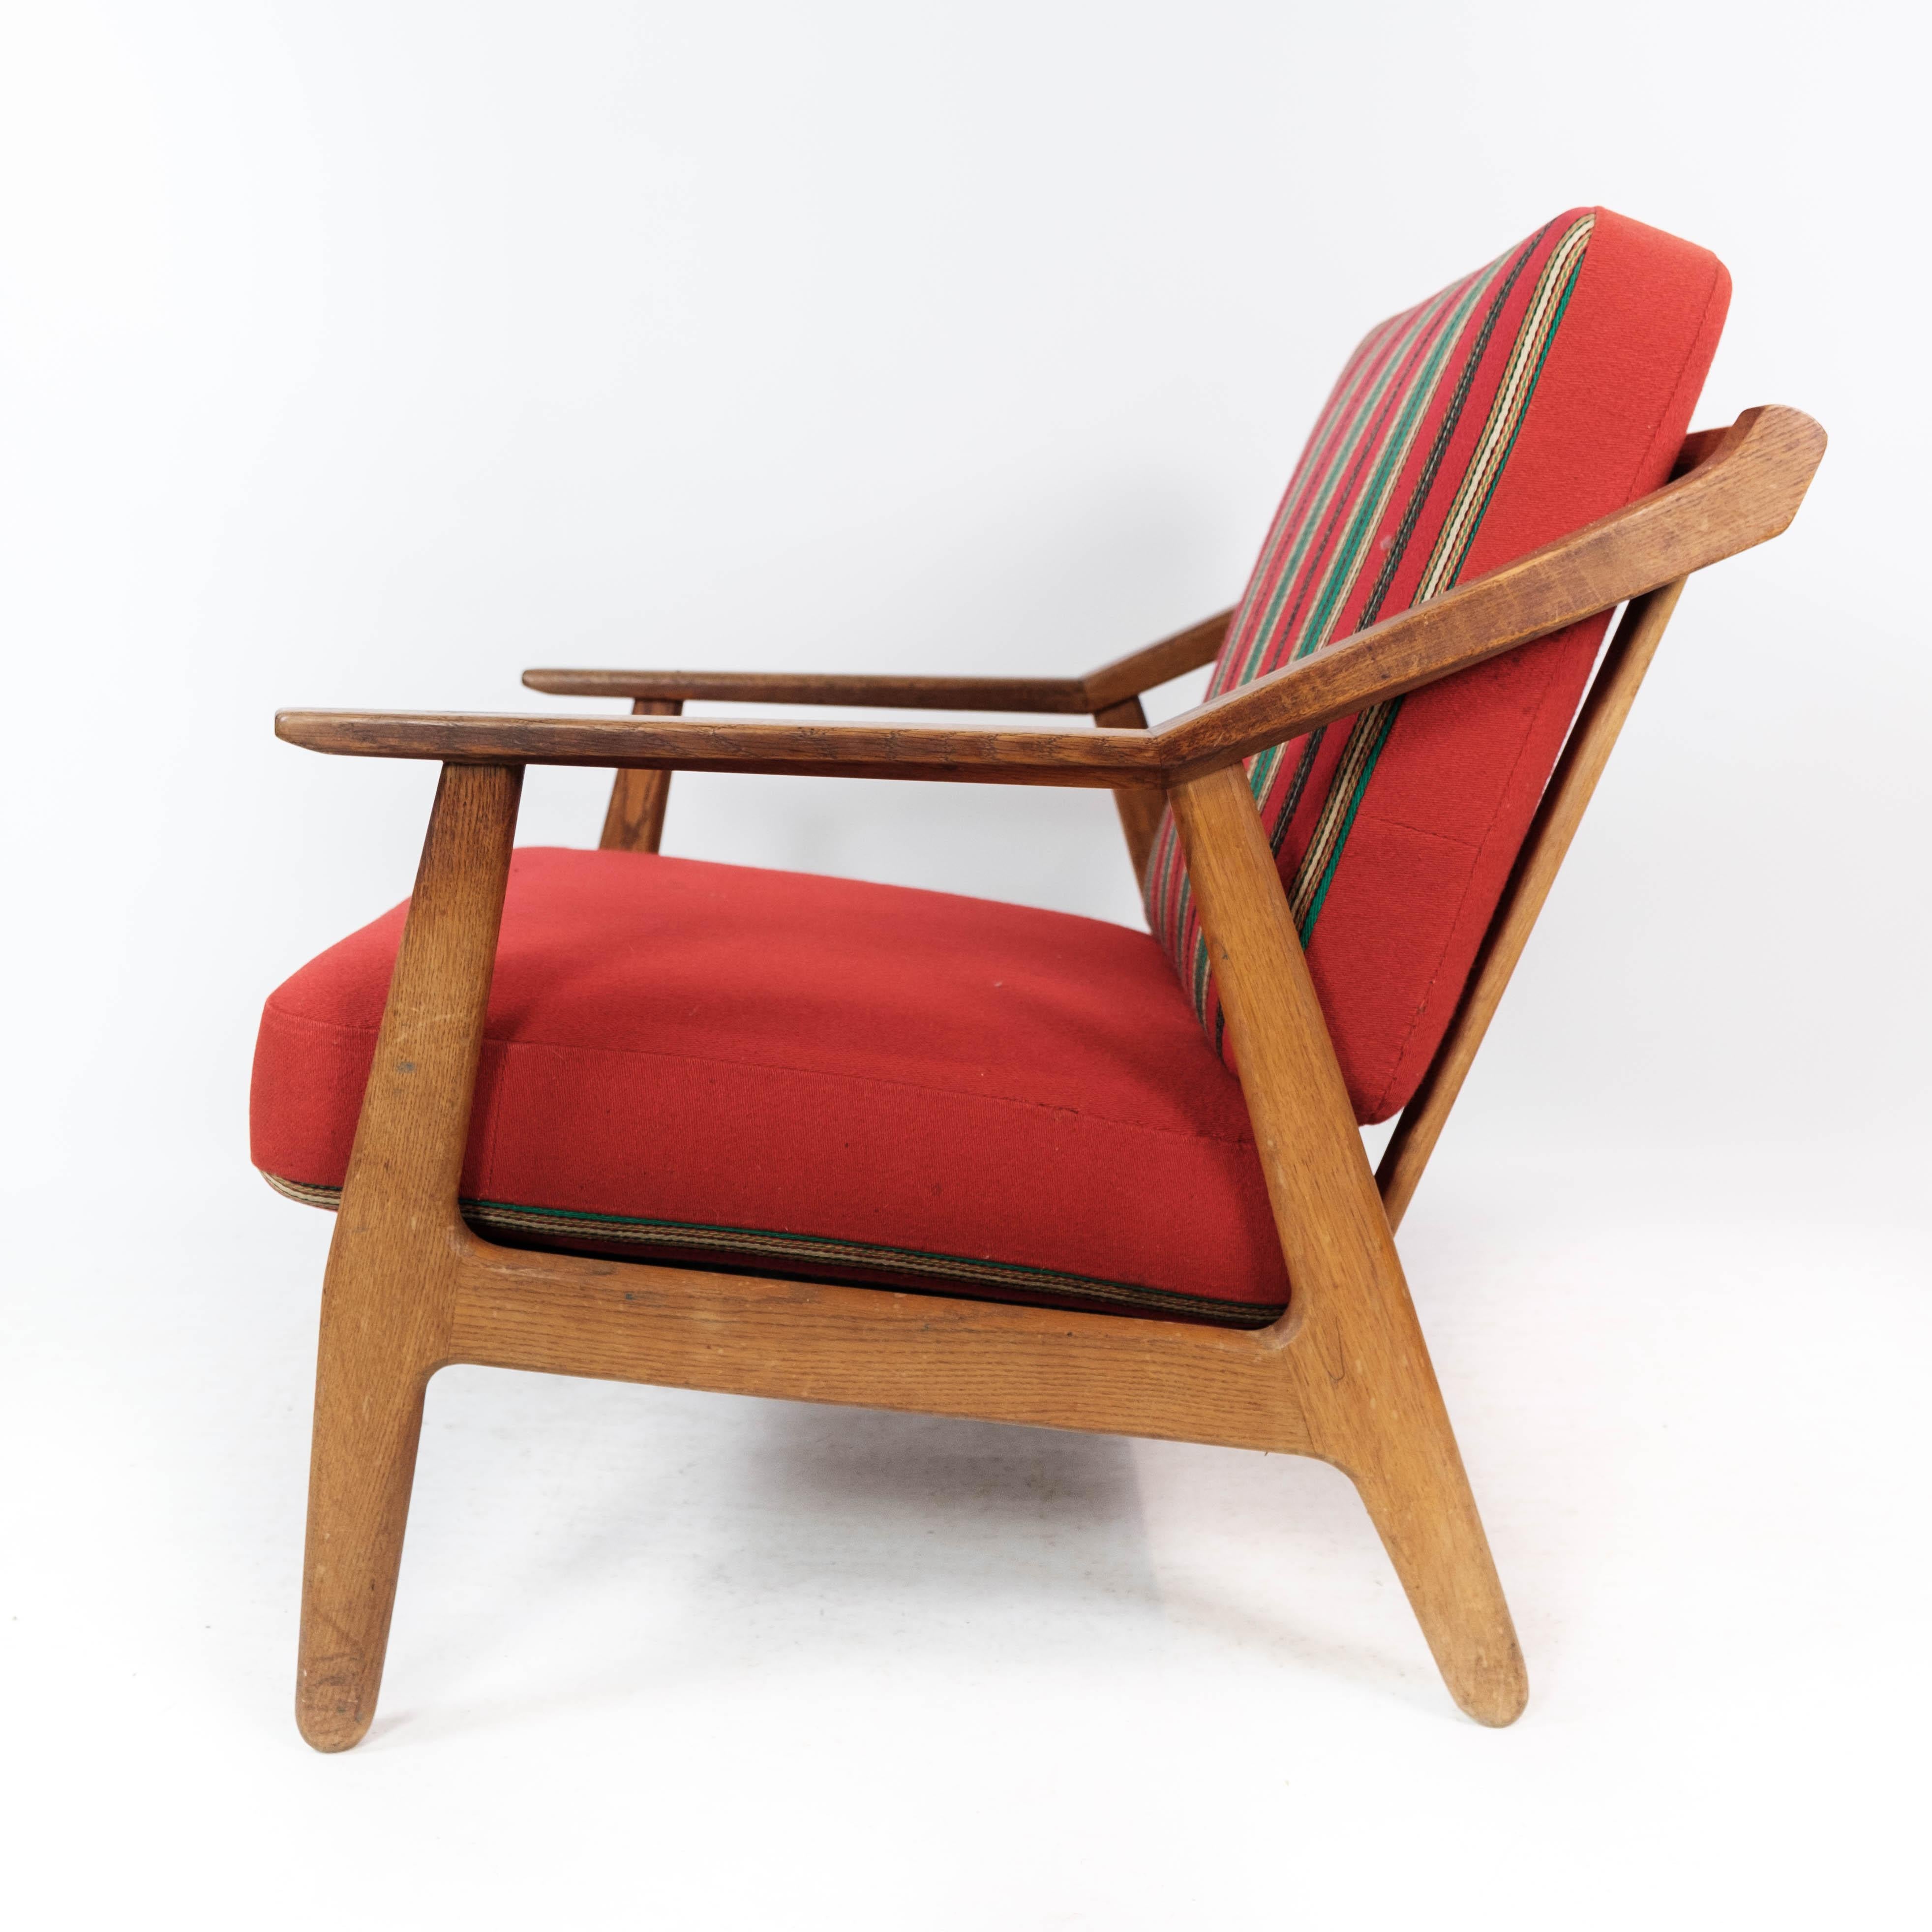 Danish Armchair in Oak and Upholstered with Red Fabric, by H. Brockmann Petersen, 1960s For Sale